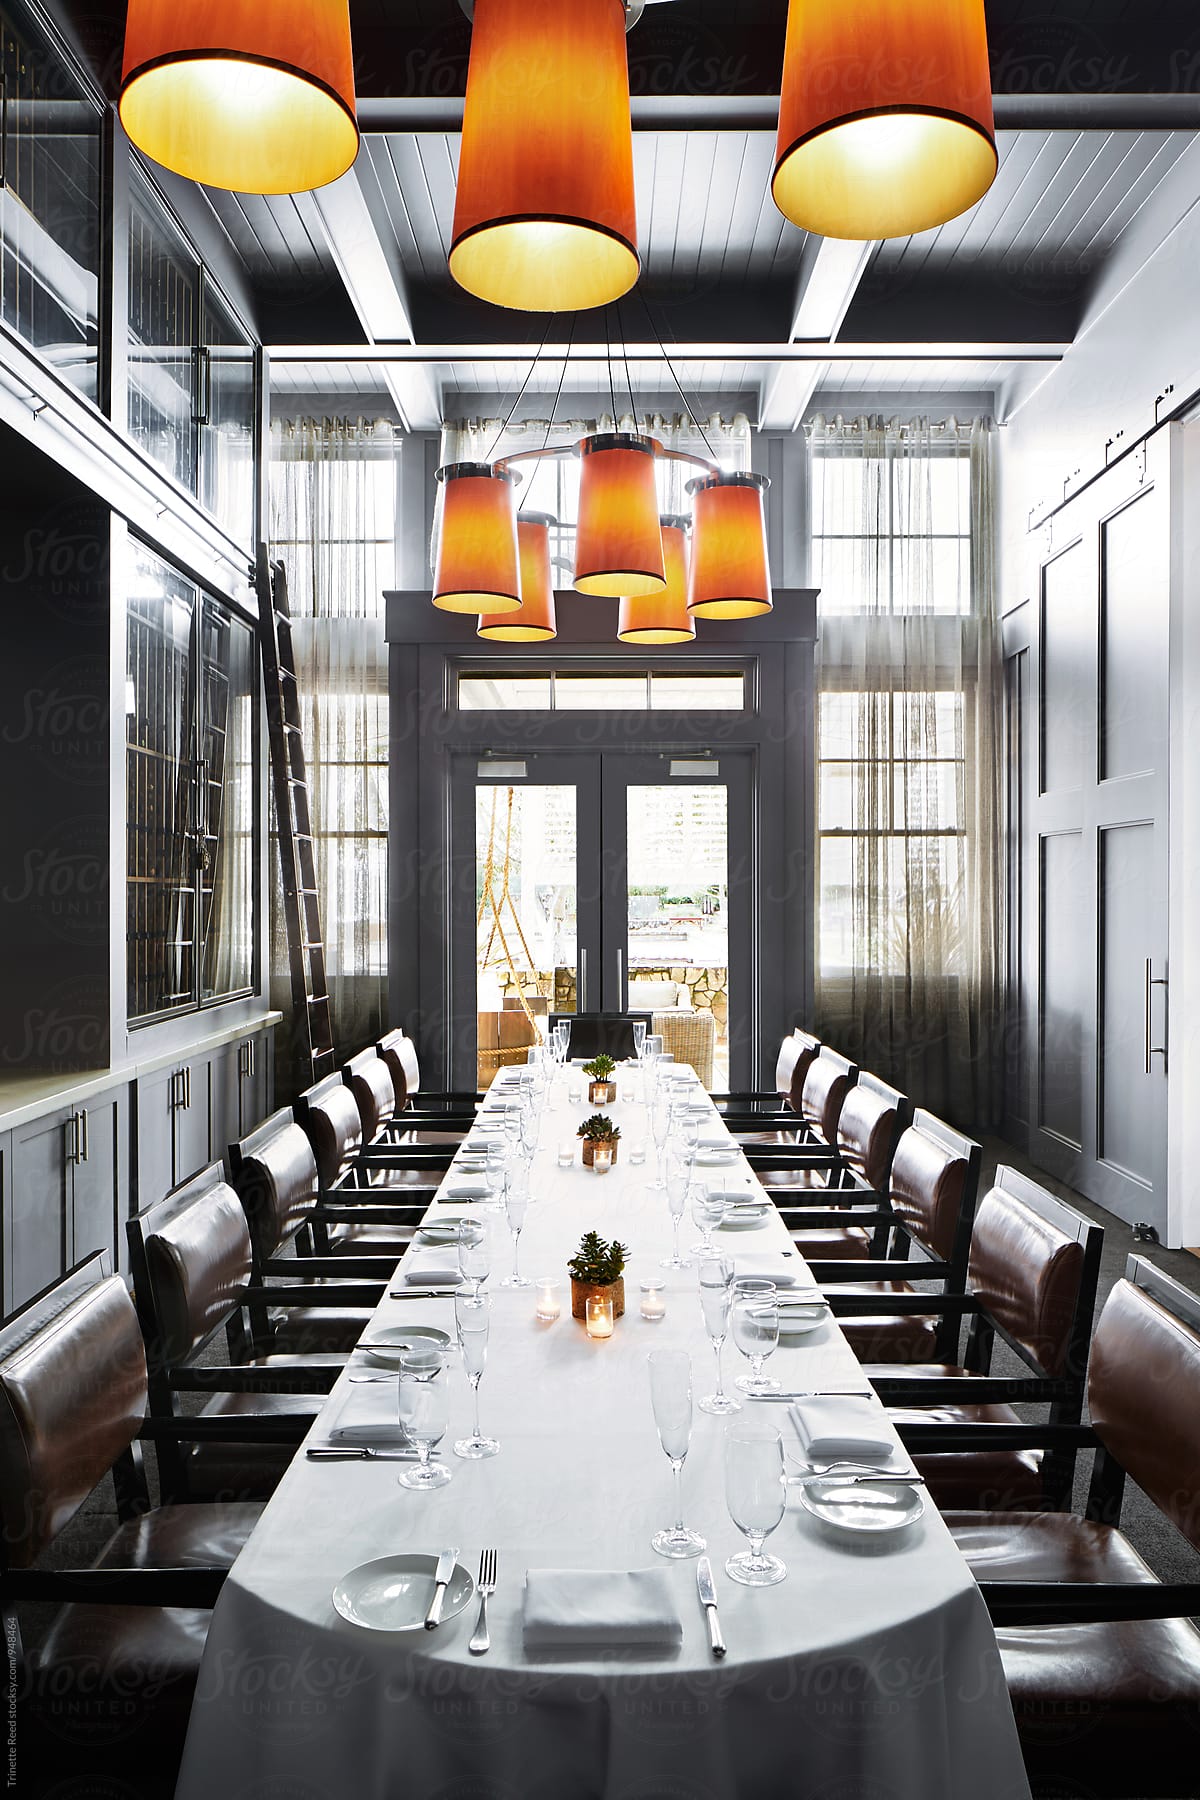 Architecture image of Restaurant with large table